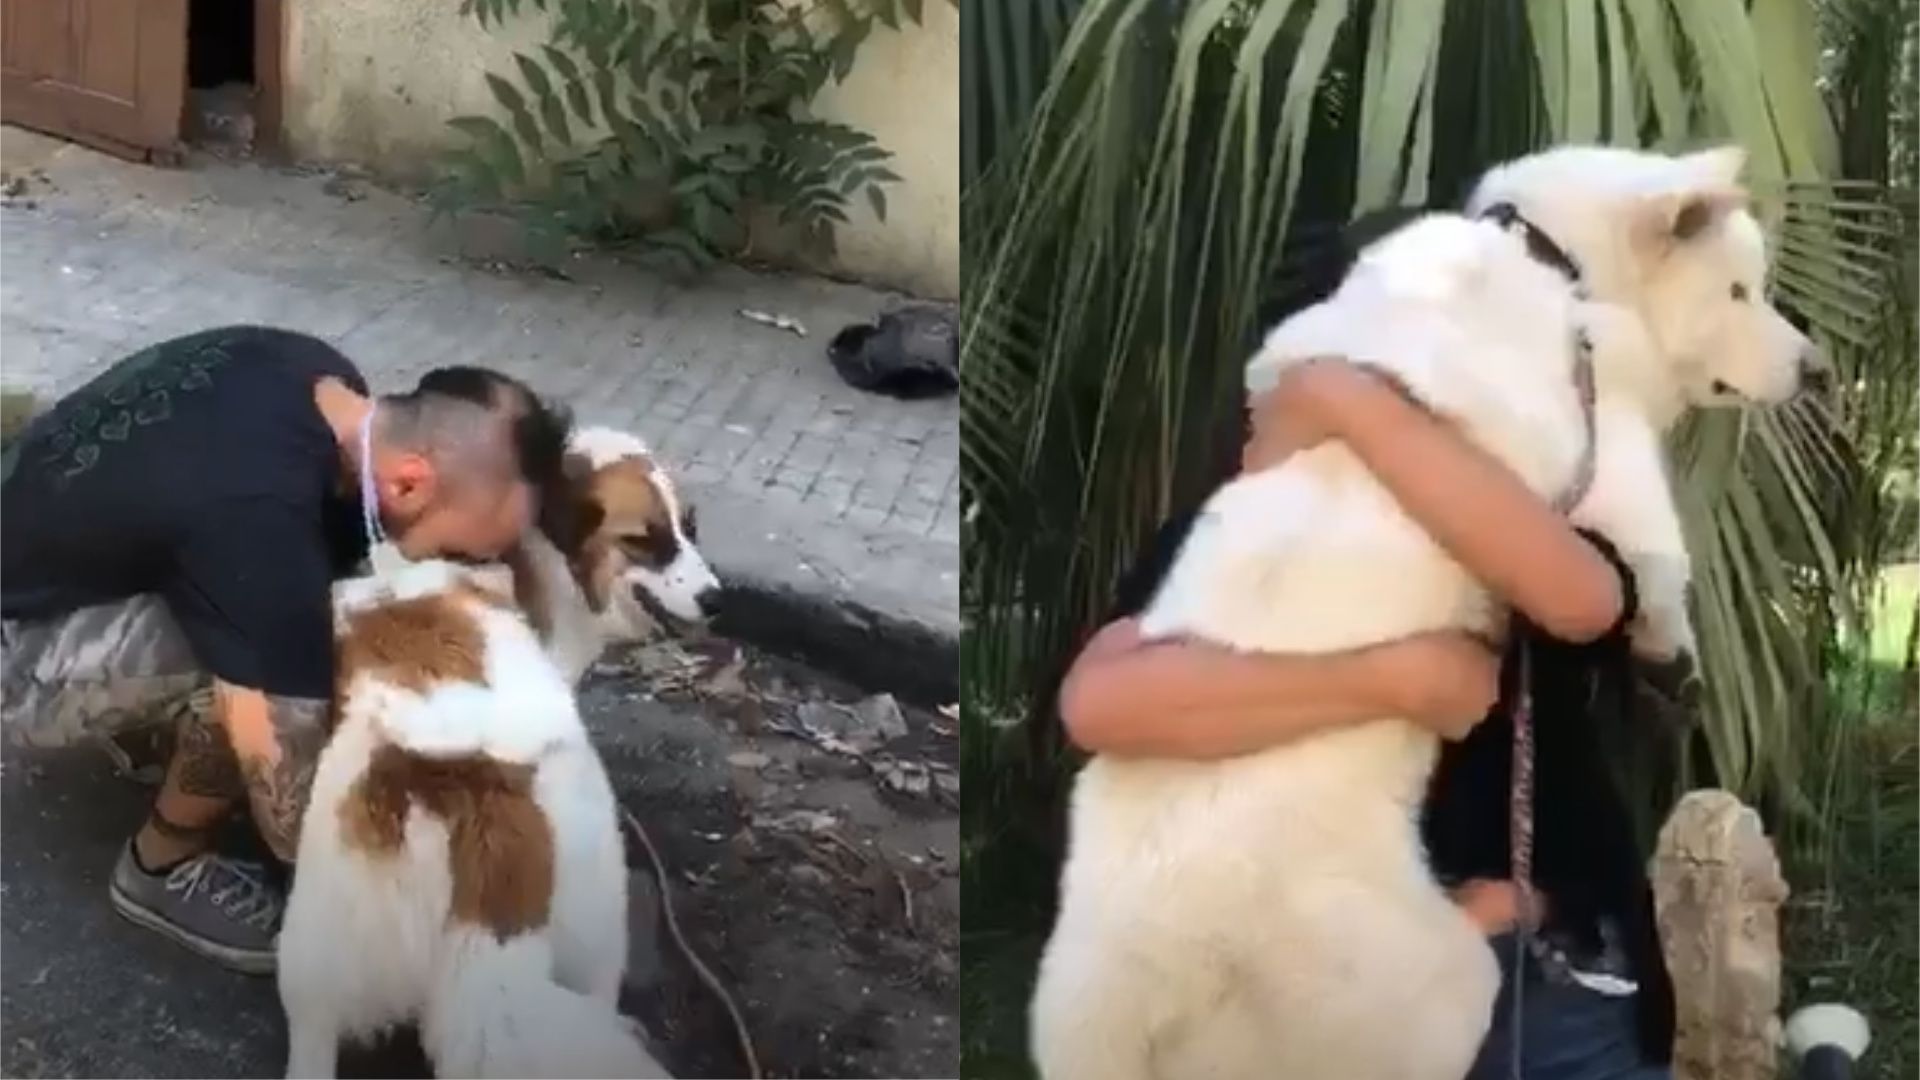 Charity Animals Lebanon Is Leading Search Teams To Find Pets Lost In The Deadly Explosion And Reunite Them With Their Owners